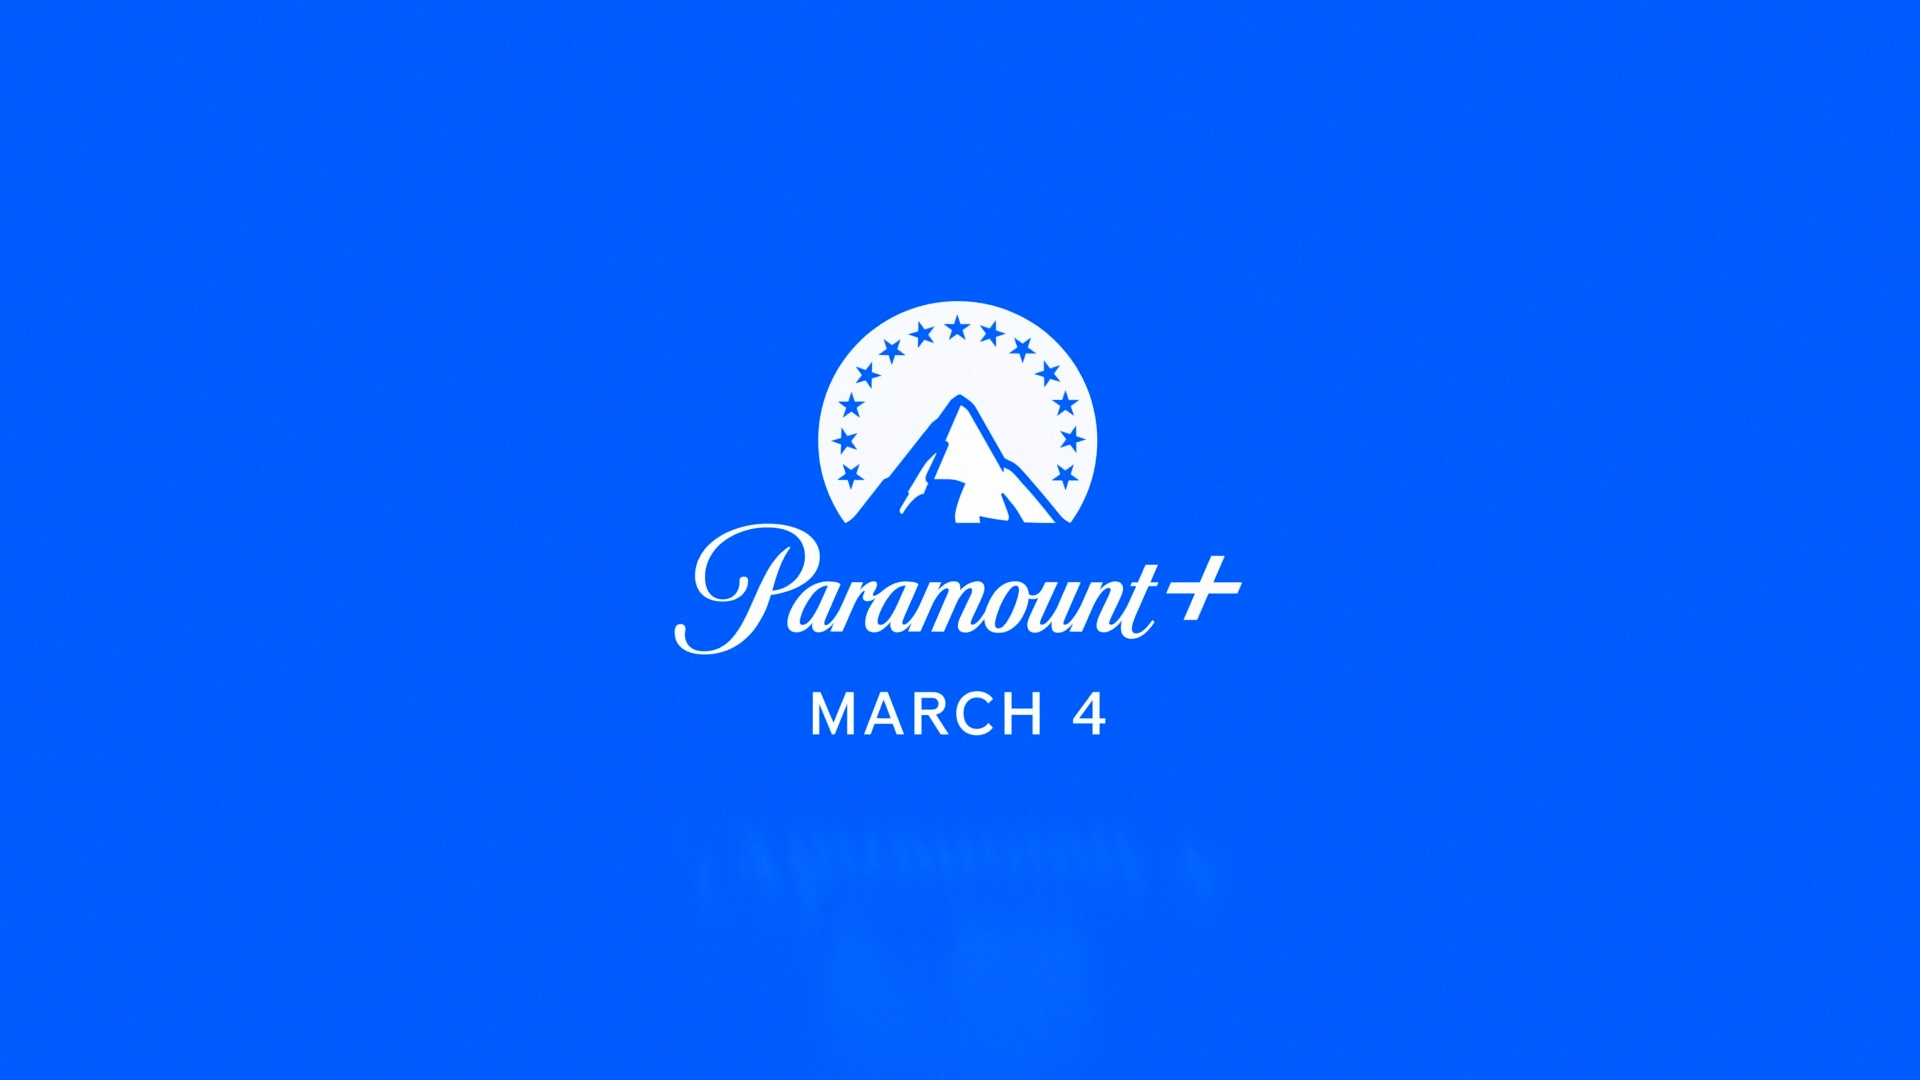 Watch Paramount Cbs All Access Is Becoming Paramount On March 4 Full Show On Paramount Plus